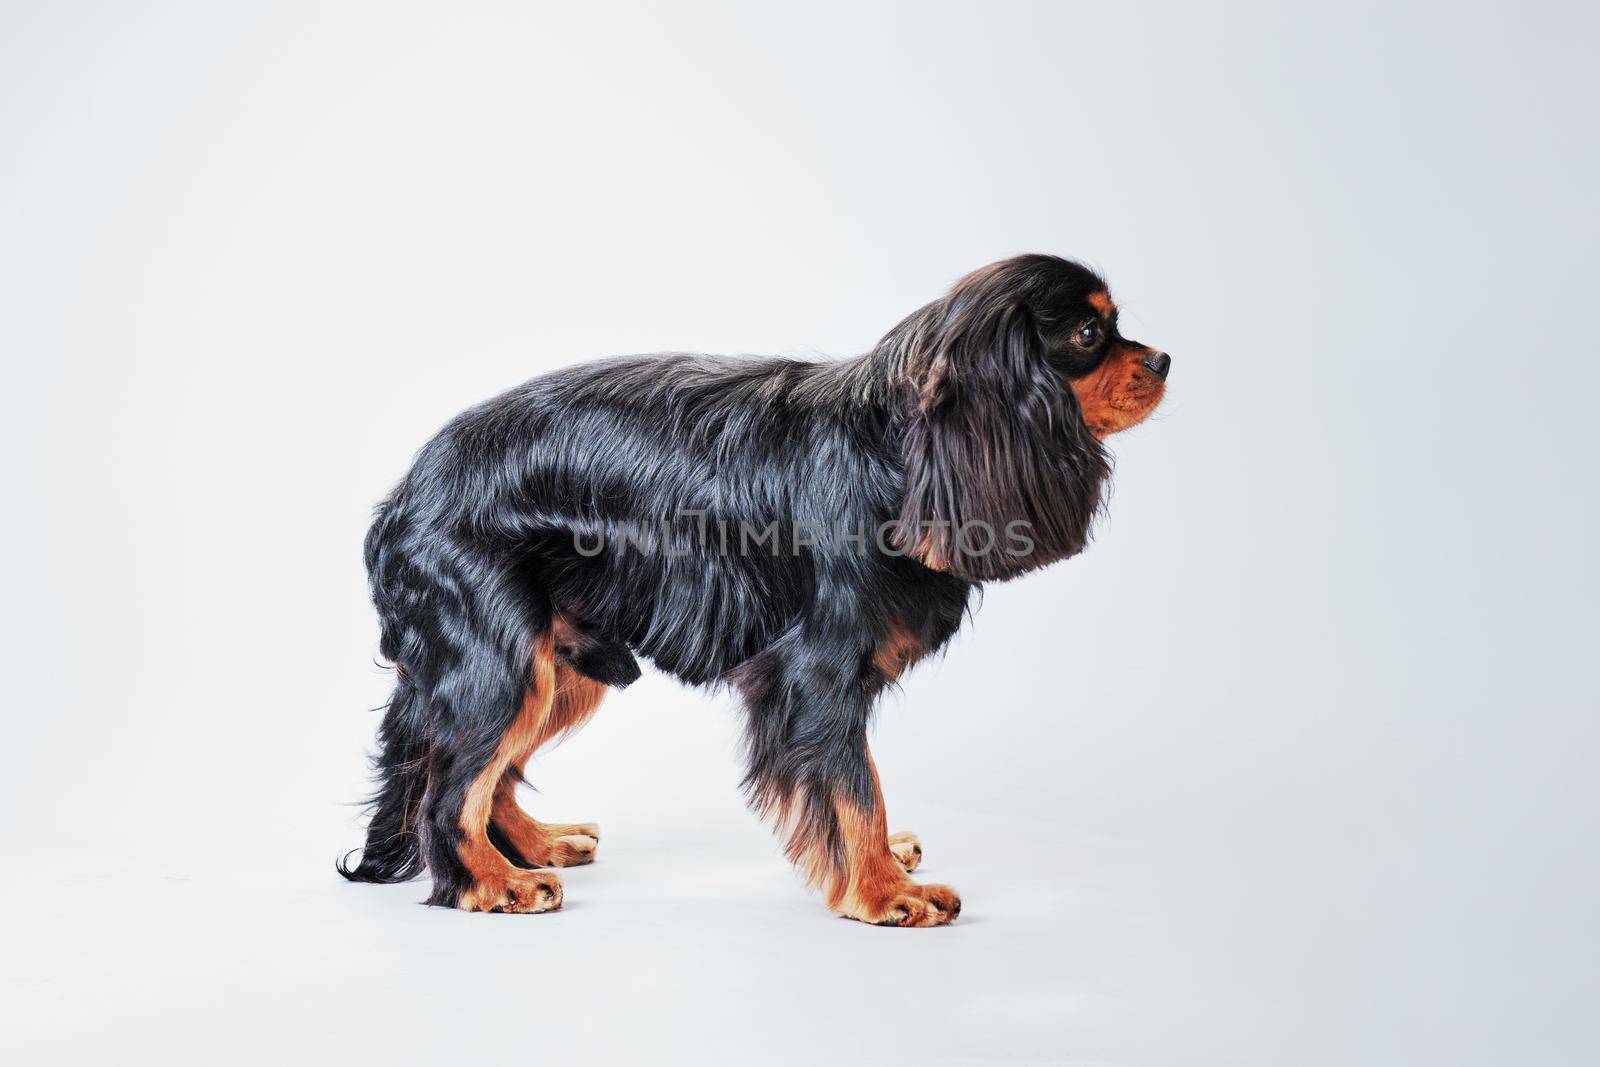 A beautiful spaniel dog stands on a light background after grooming.